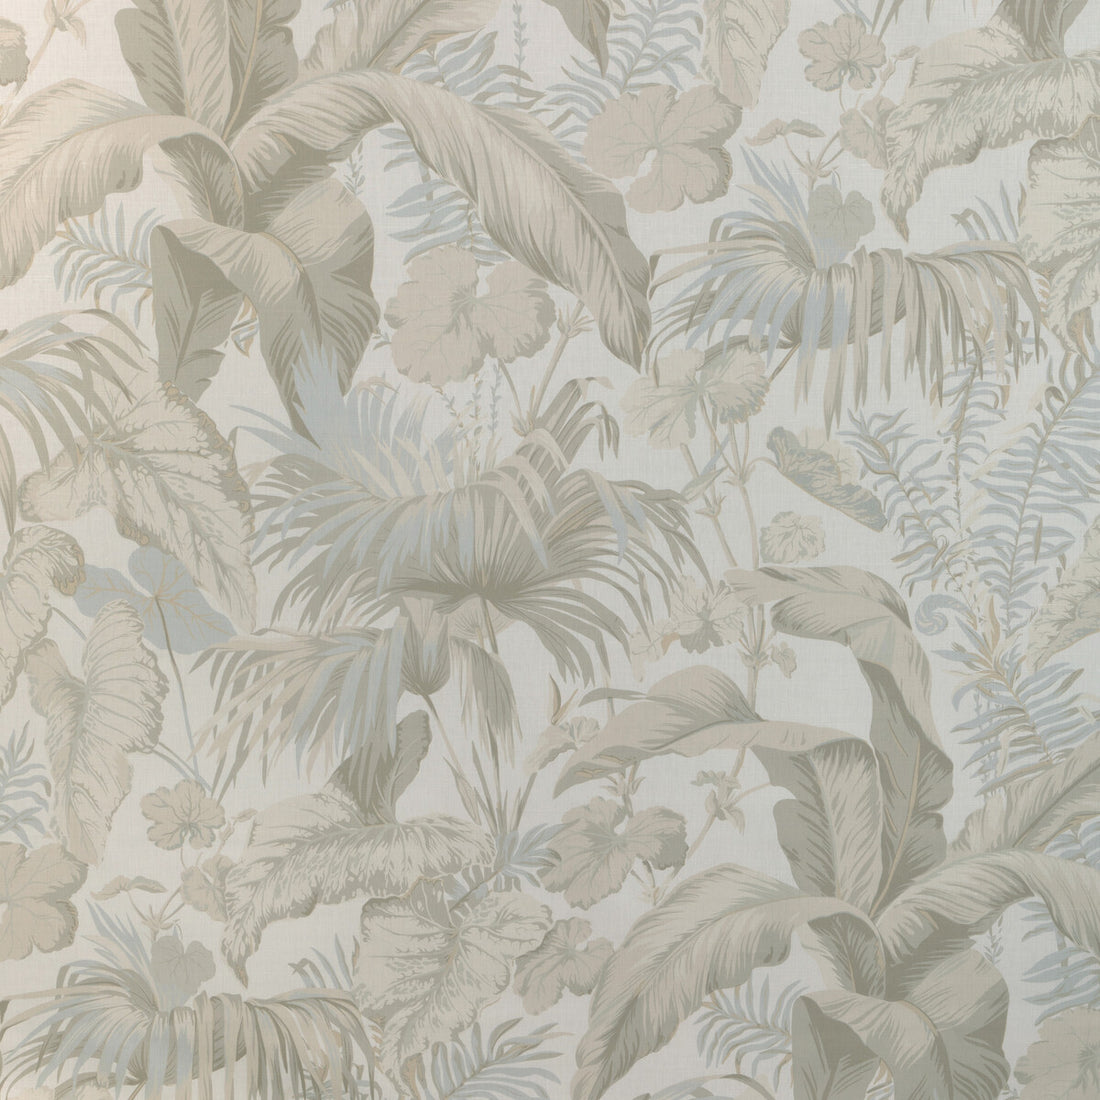 Yasuni fabric in sepia color - pattern YASUNI.106.0 - by Kravet Couture in the Casa Botanica collection